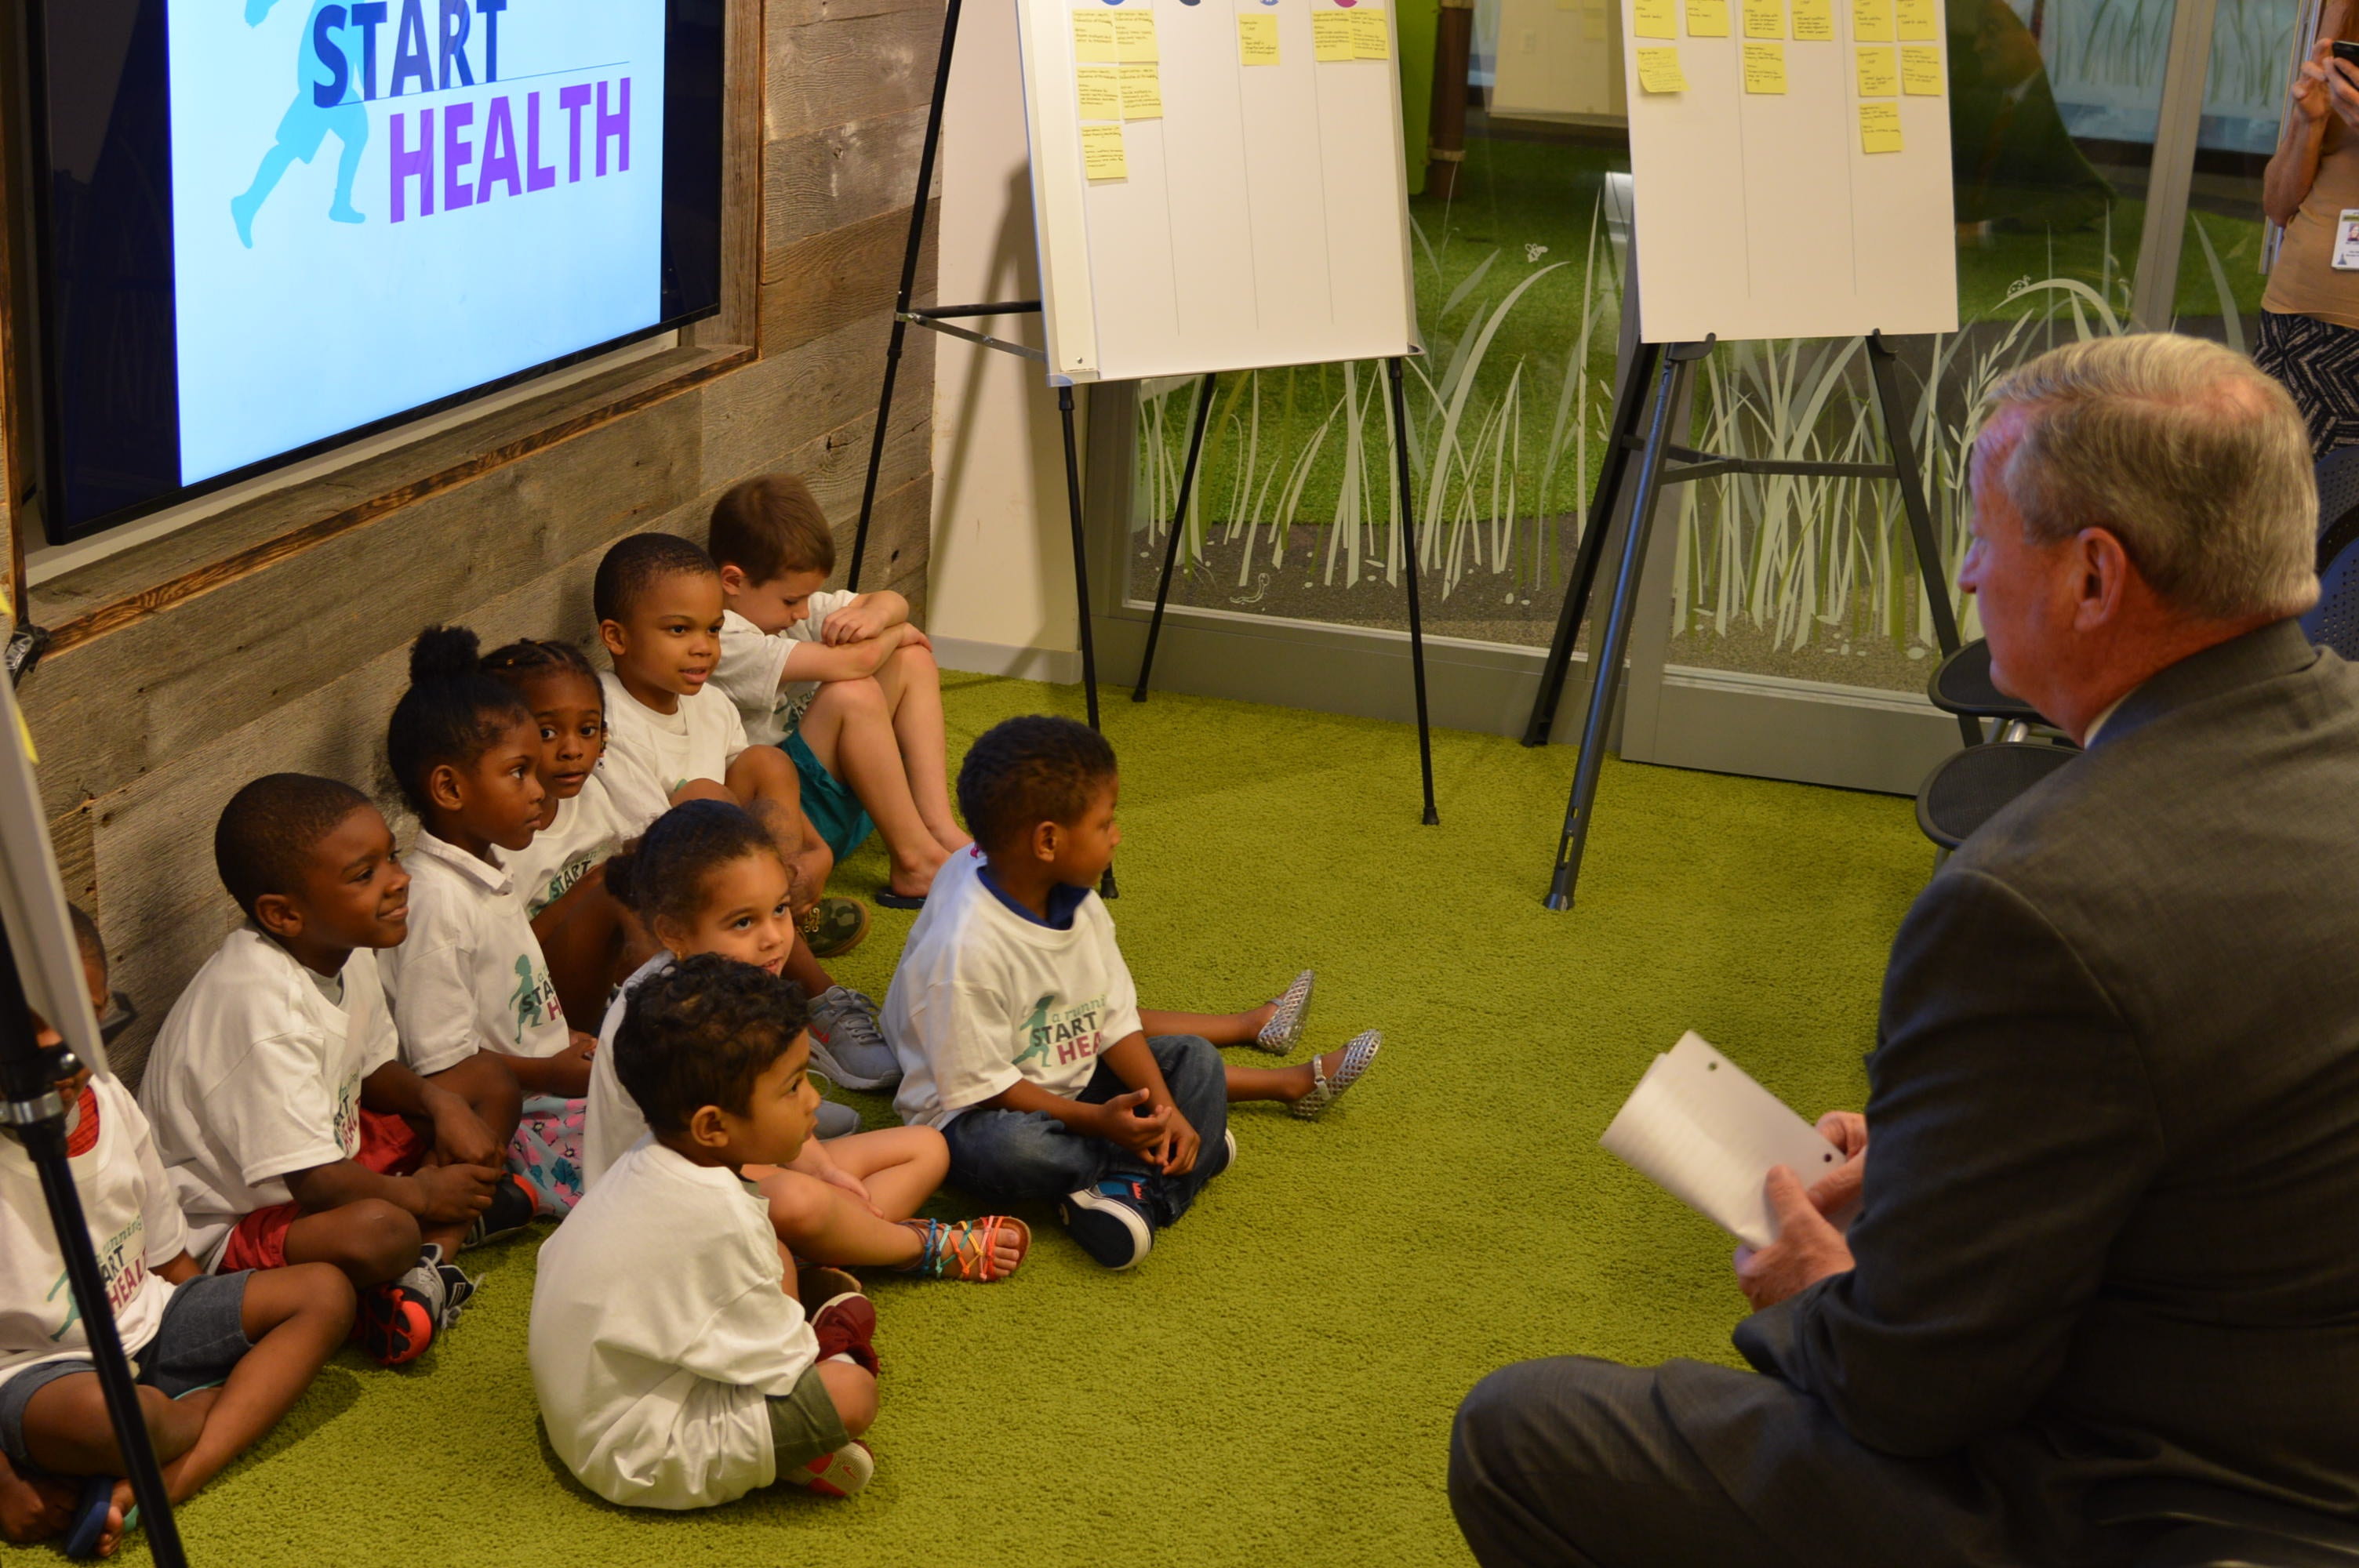 Mayor Jim Kenney speaks with children before announcing the new health initiative.